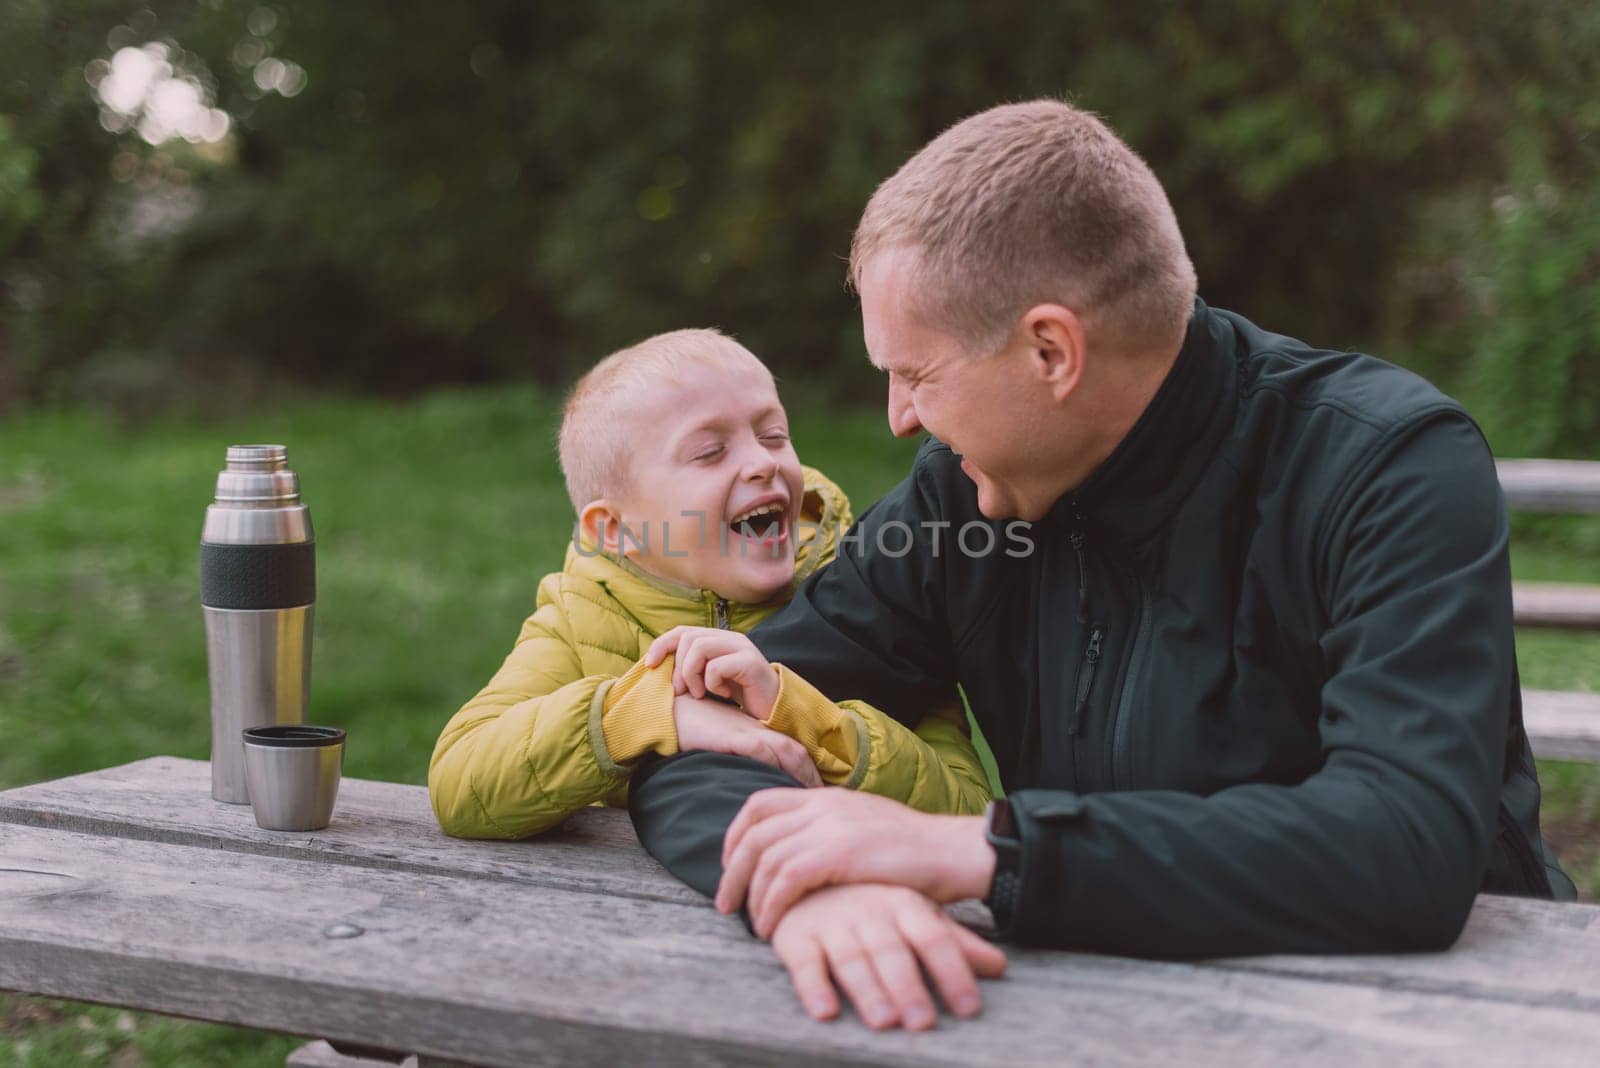 Happy family: father and child boy son playing and laughing in autumn park, sitting on wooden bench. Father and little kid having fun outdoors, playing together. Father and son sitting on a bench and talking. dad son park bench table autumn thermos.